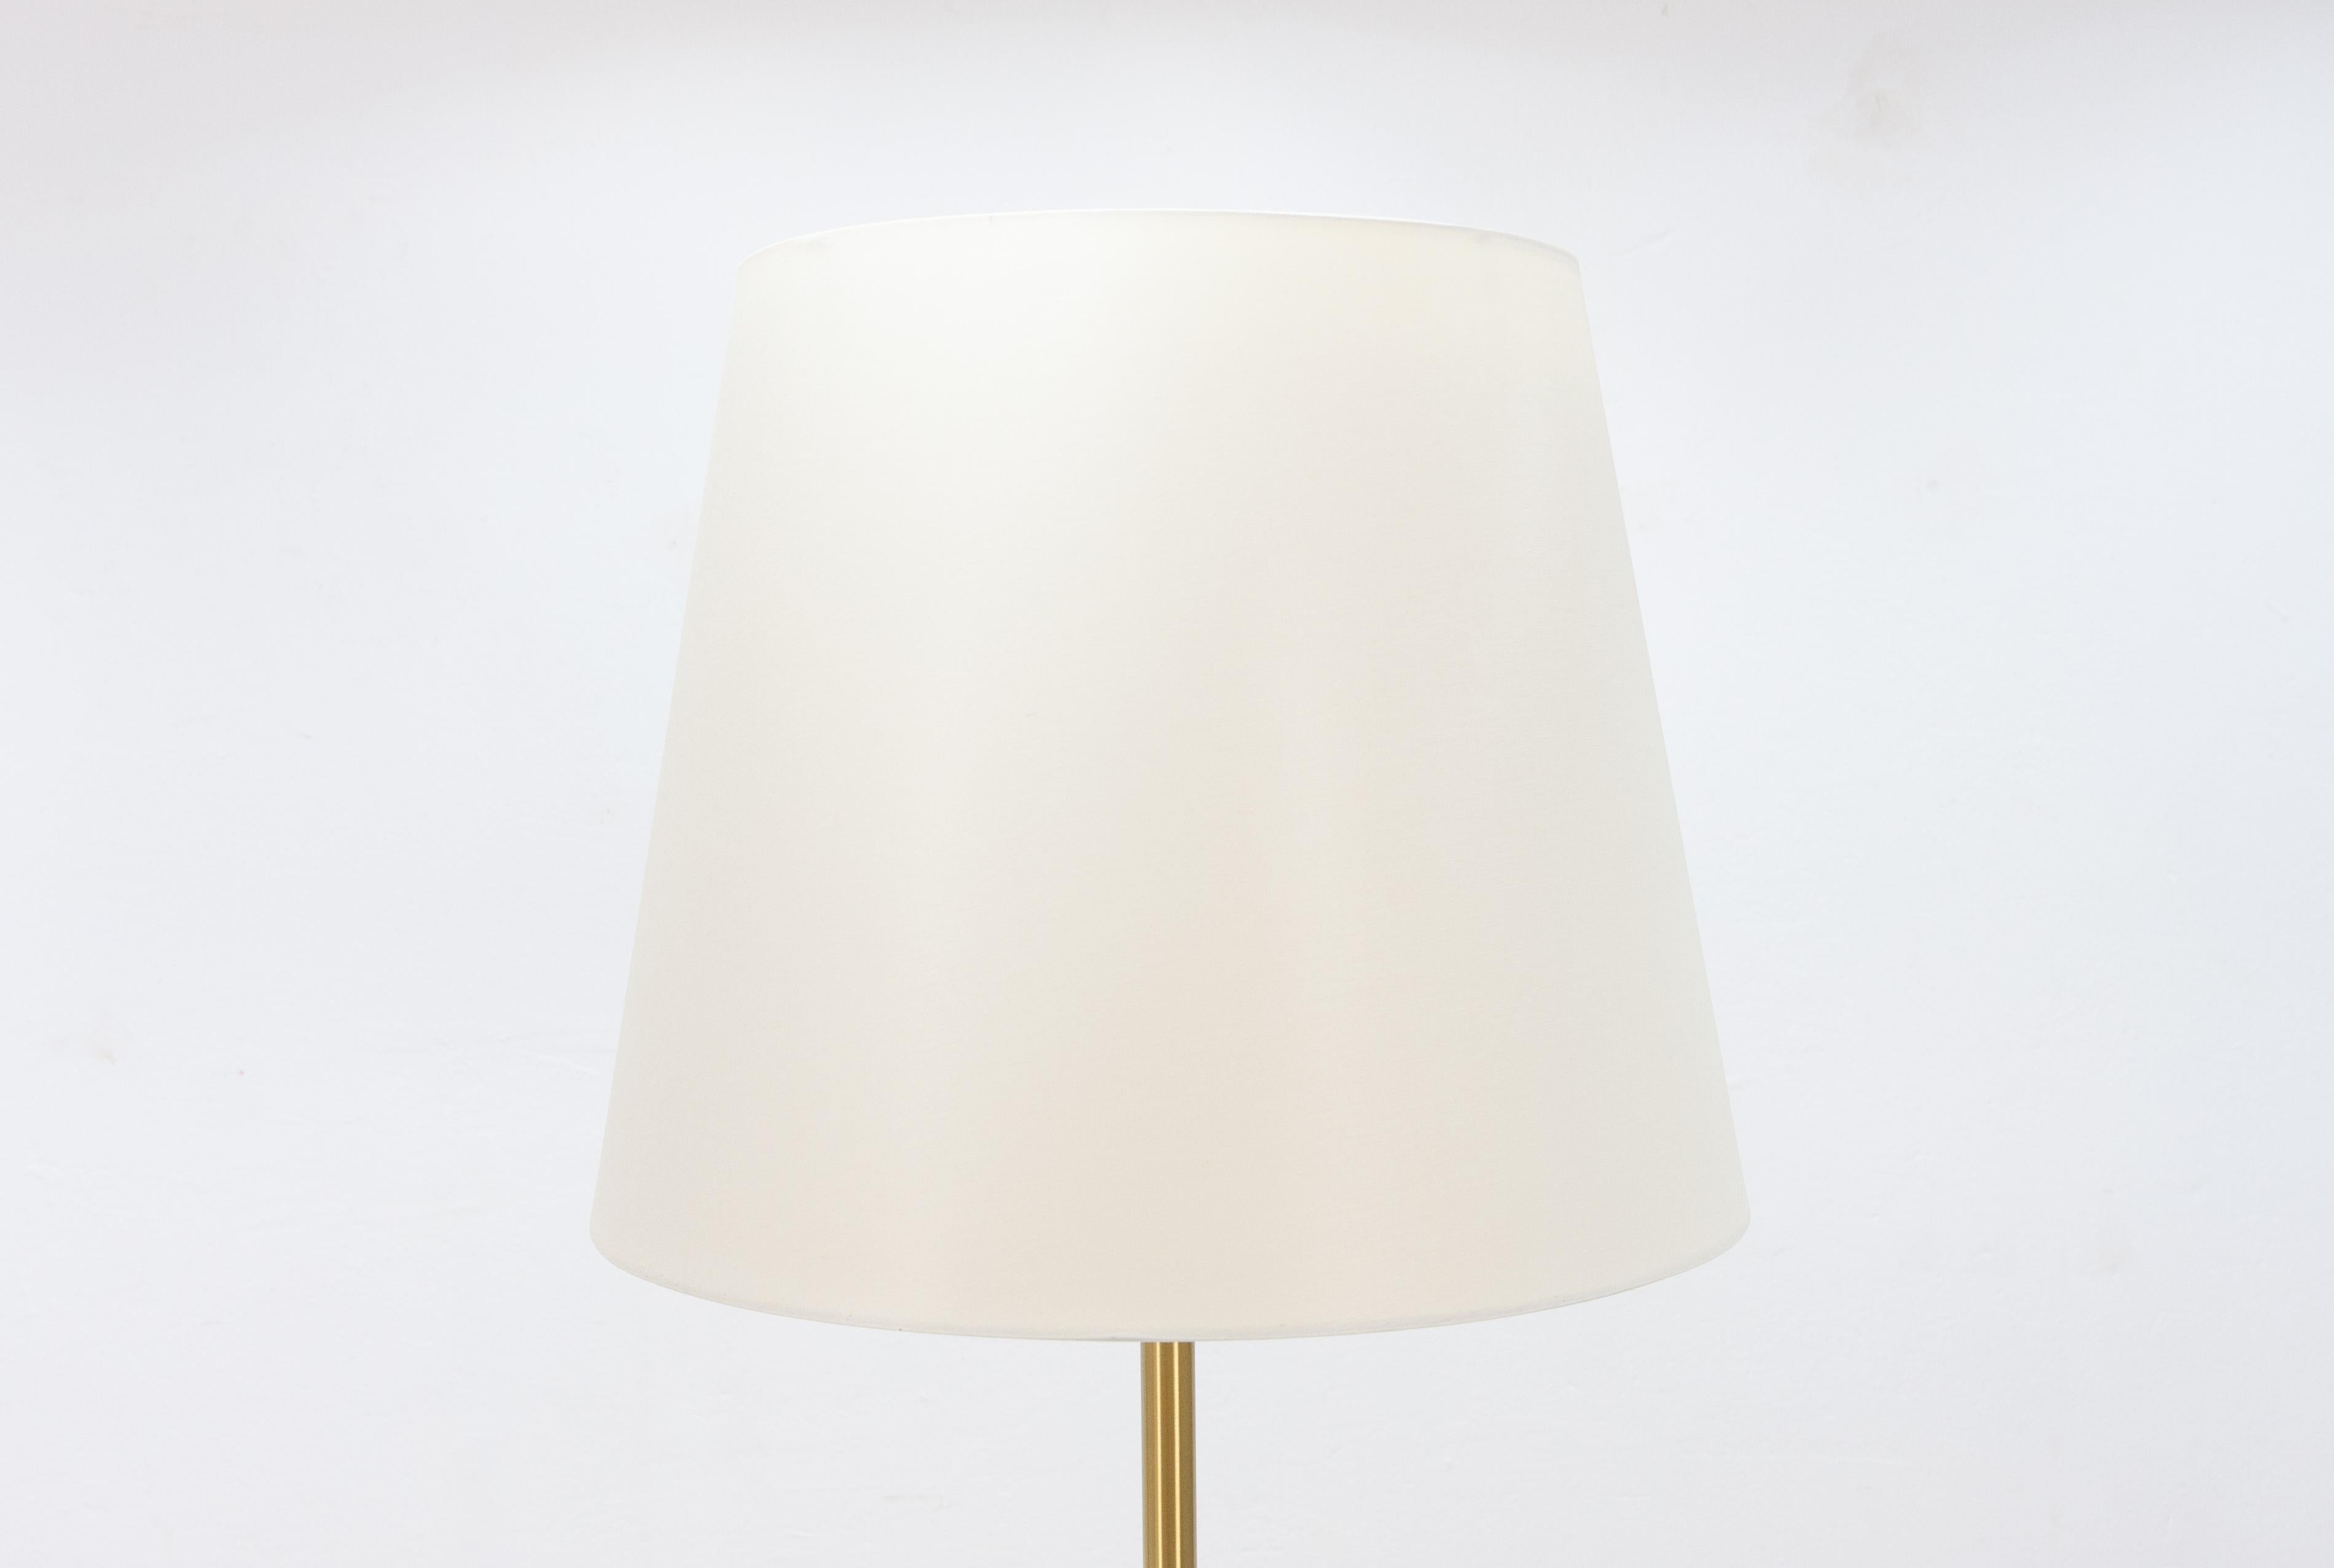 Dijkstra brass floor lamp. Beautiful simple design featuring 3 bulbs and a pull down switch.
Brass base, with a cream color hood, very good condition.